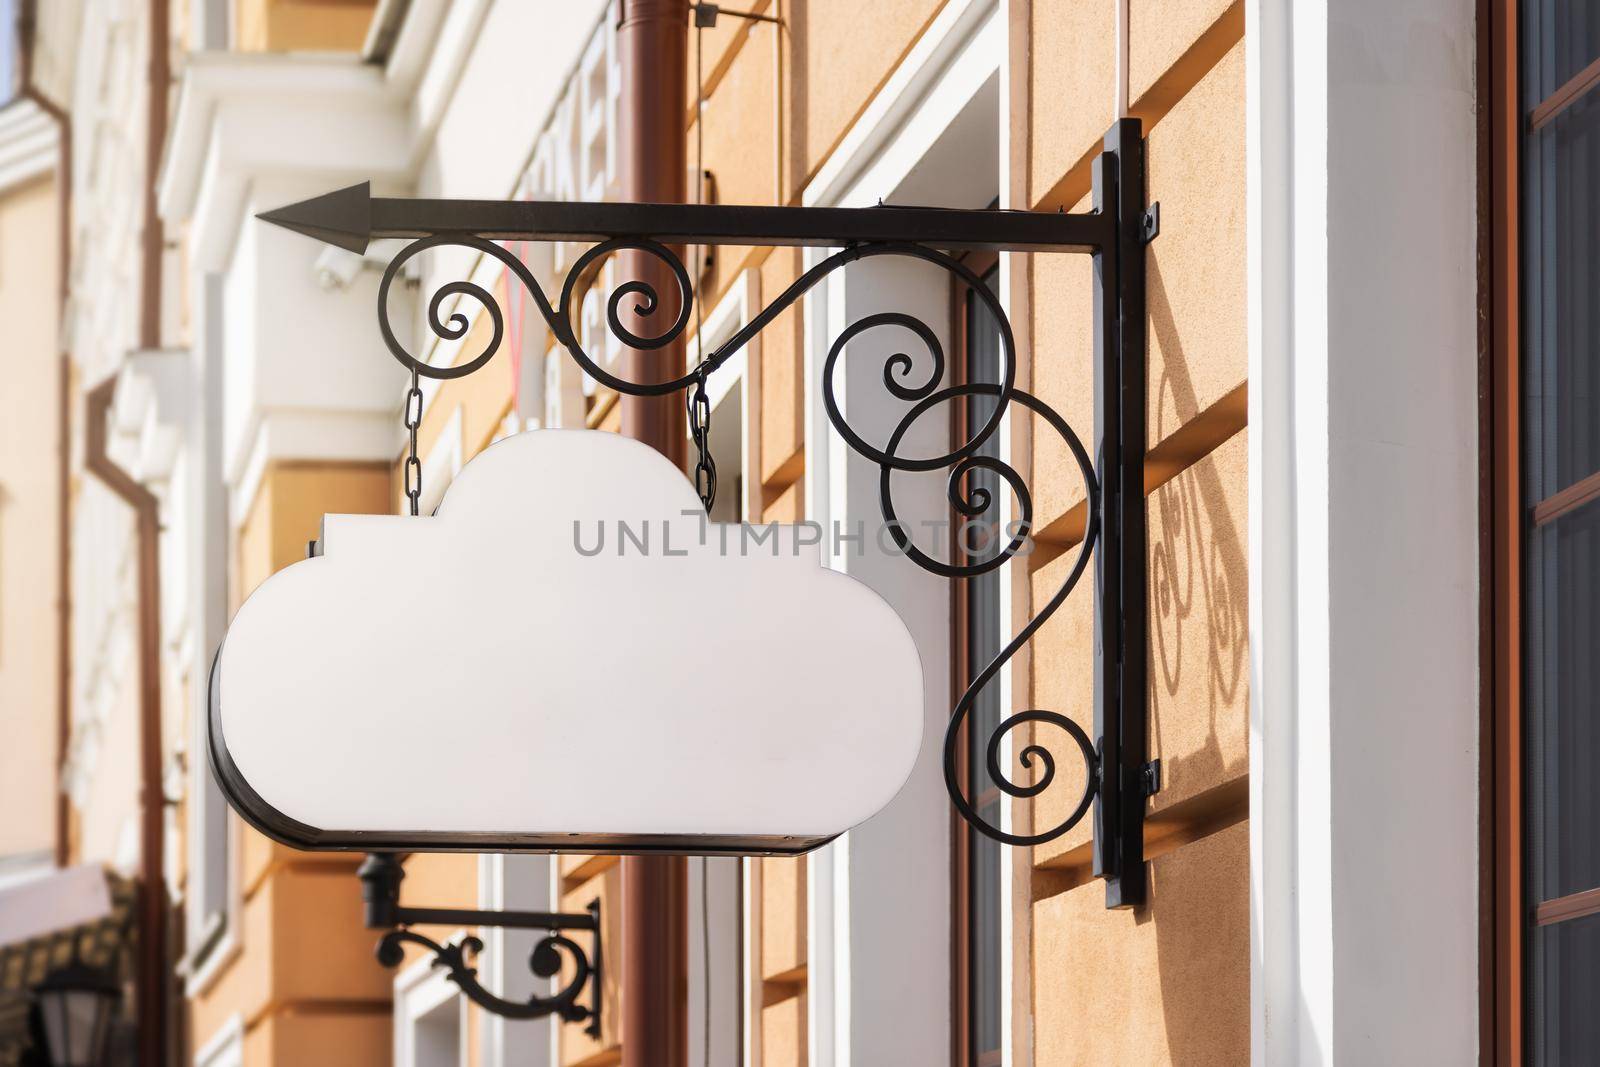 mockup, white signboard, in the form of a cloud, classic style. for a restaurant or cafe on the house, against the backdrop of the old city street. open a sign style to add a sign or company logo